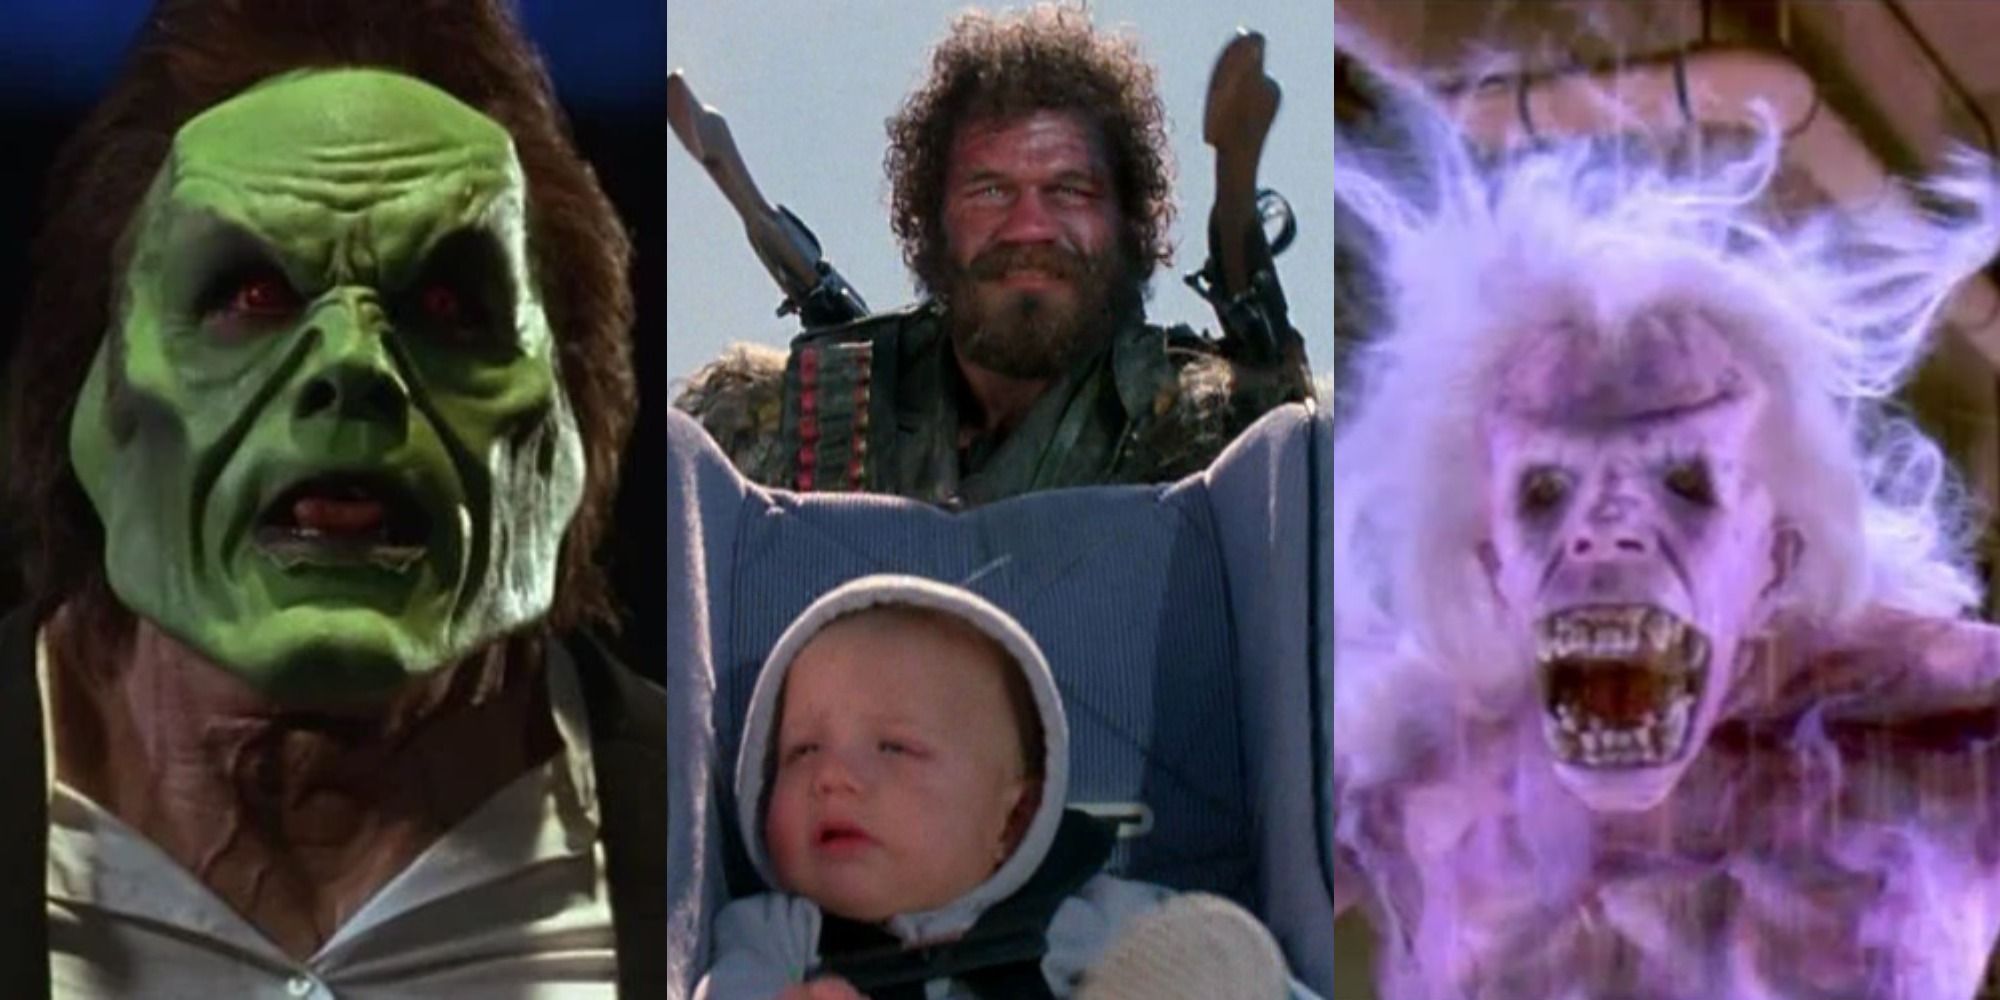 Three images from The Mask, Raising Arizona, Ghostbusters